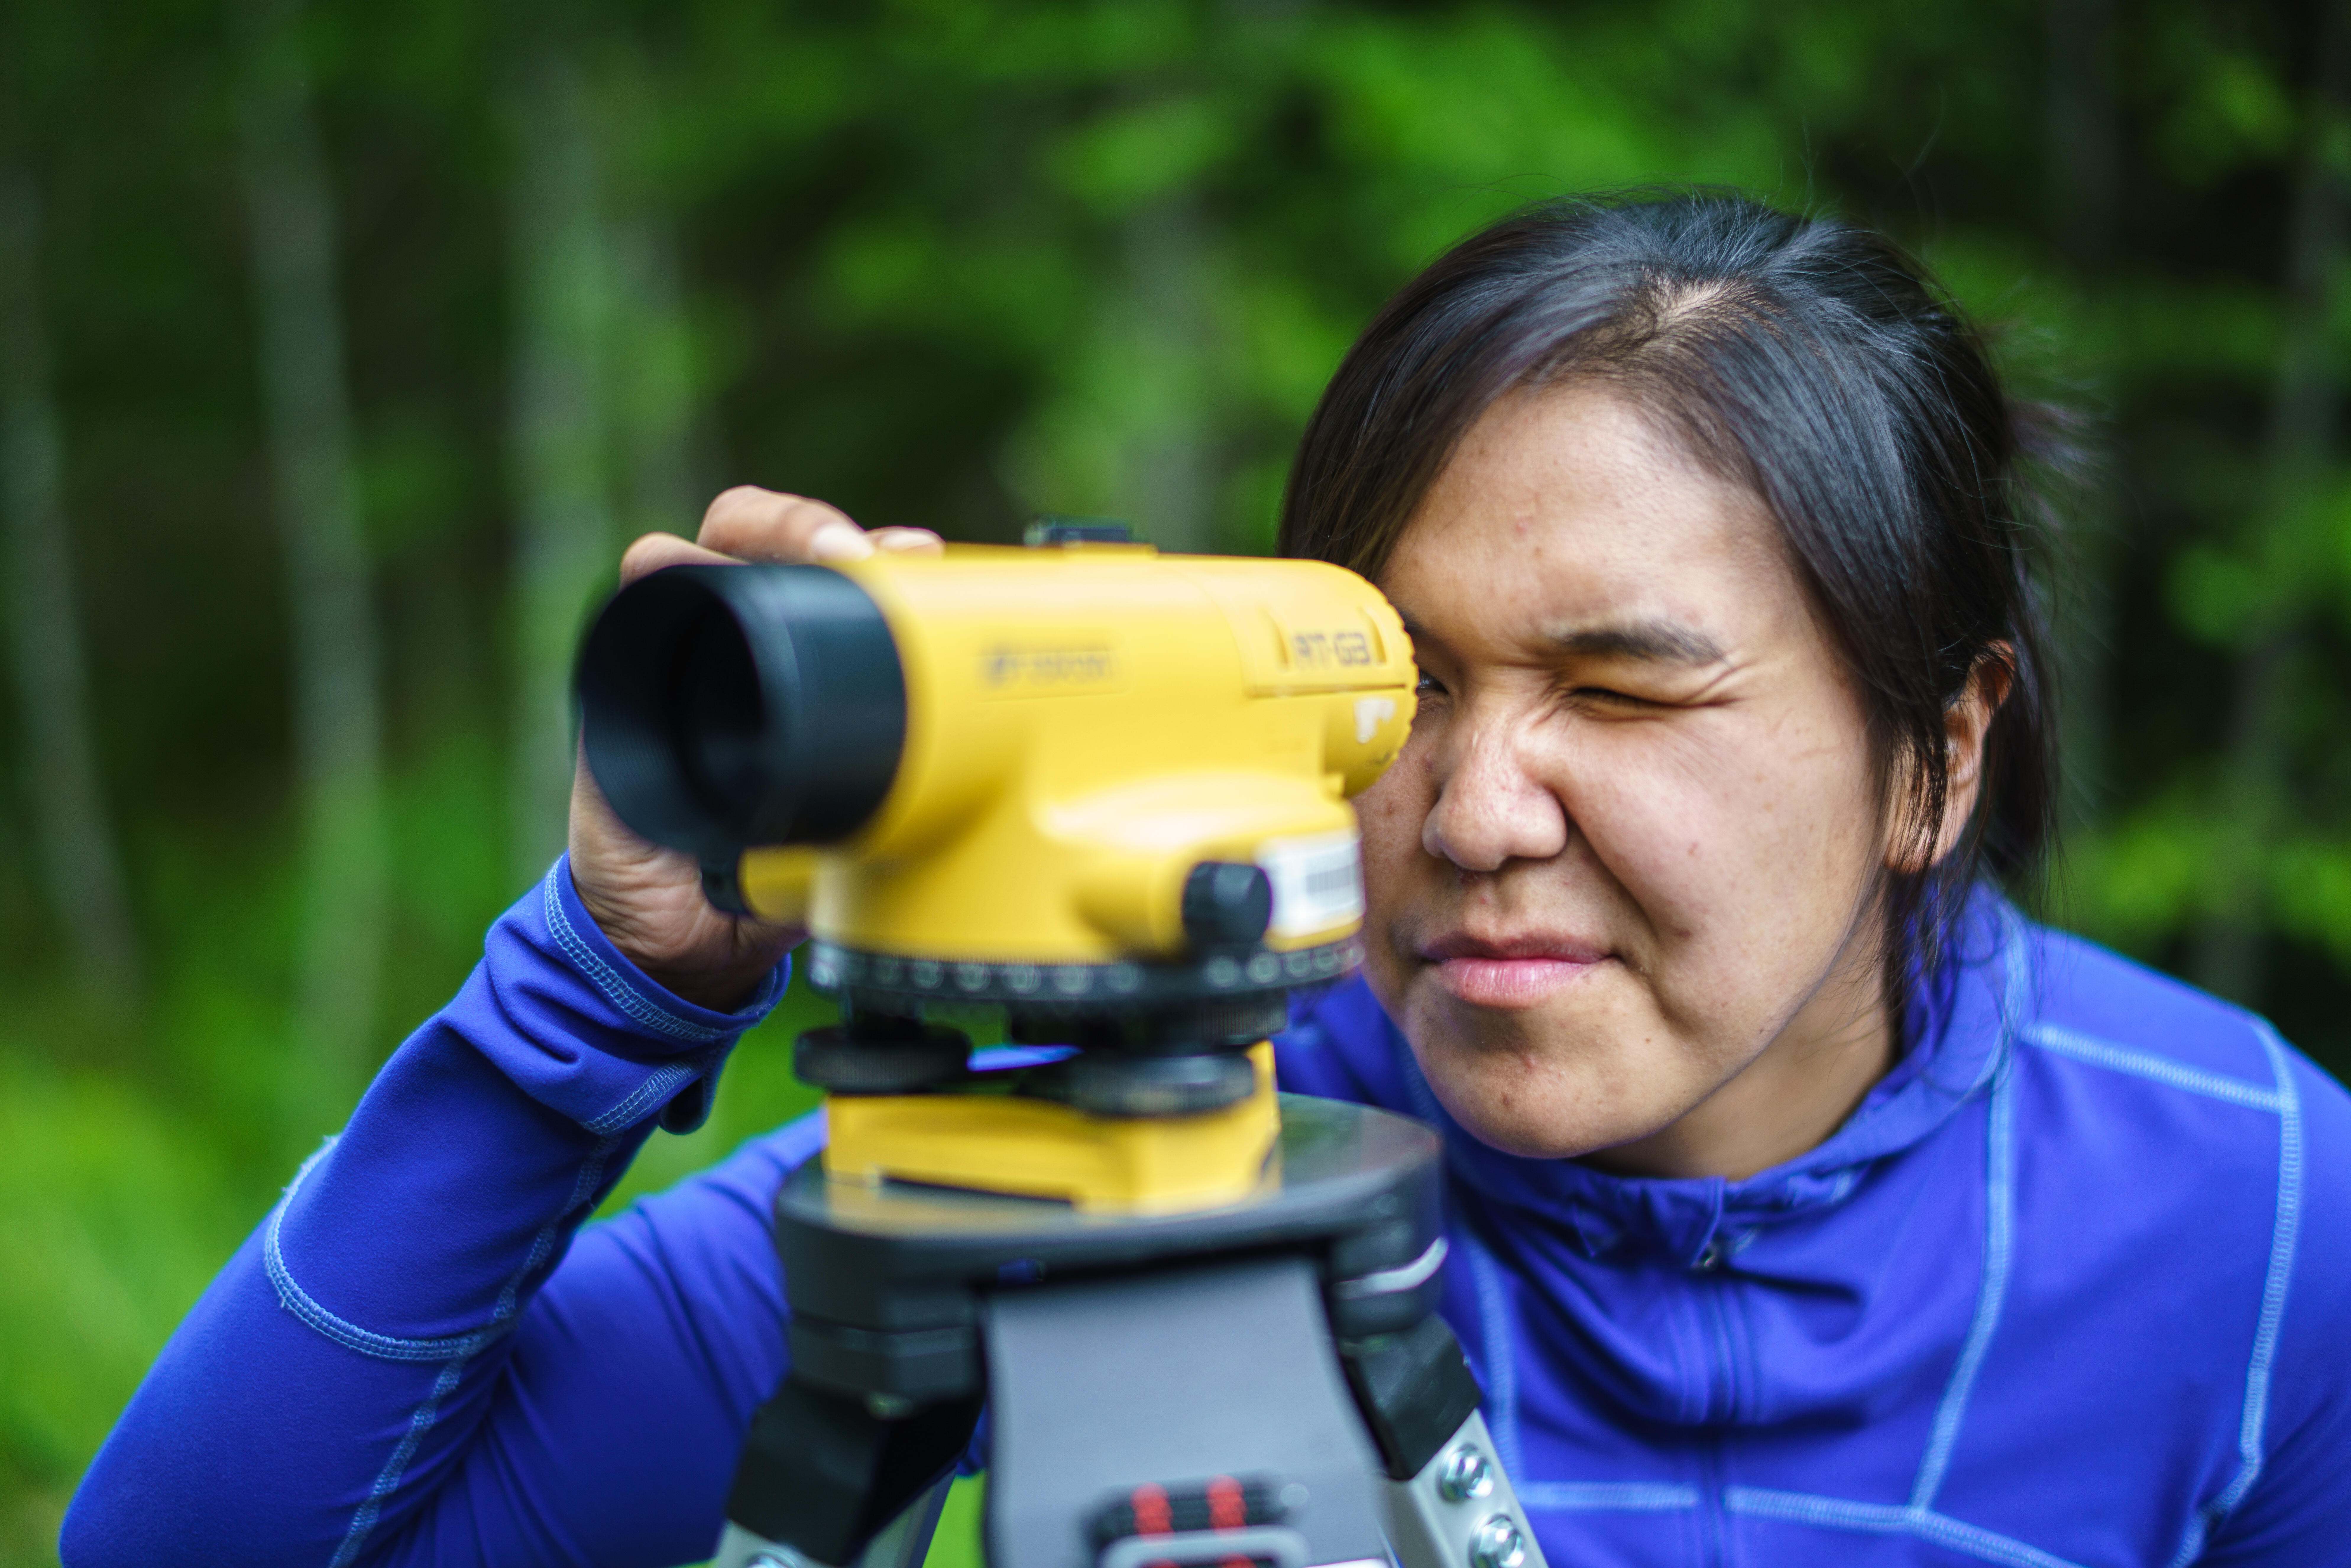 A woman looks through a yellow optical level.